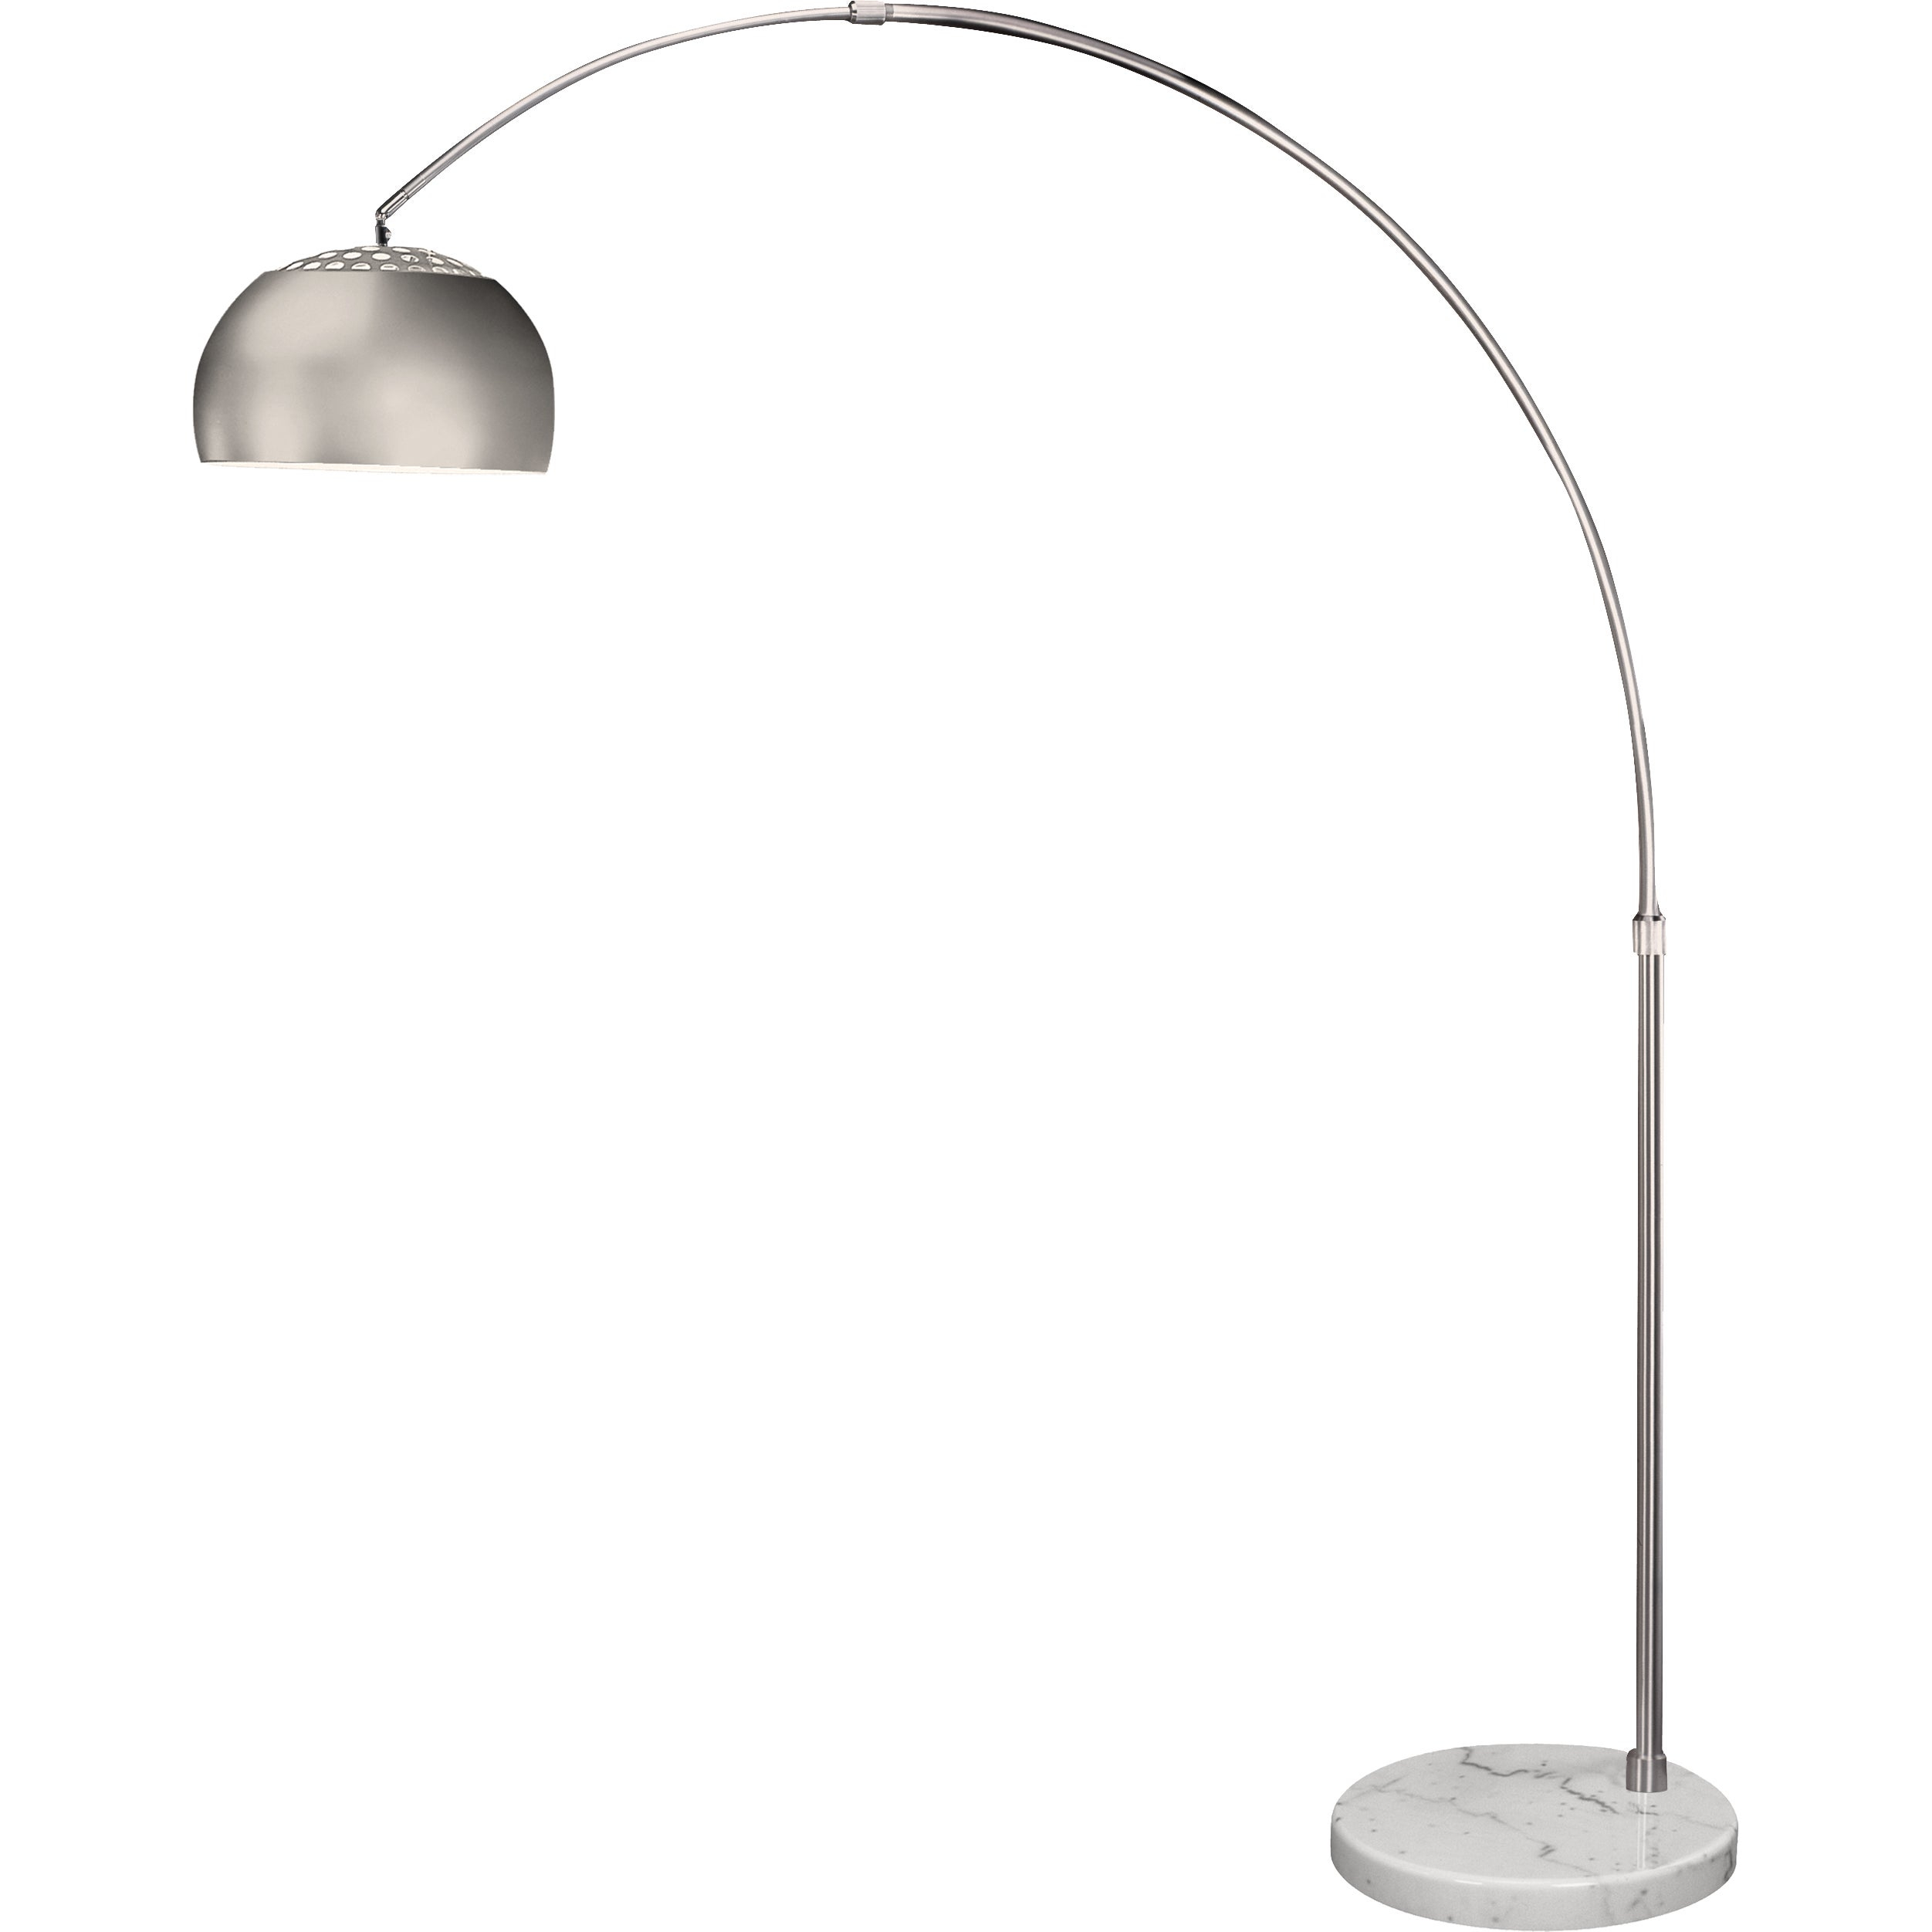 Mid 1 Light Brushed Nickel Arc Floor Lamp throughout sizing 2503 X 2503